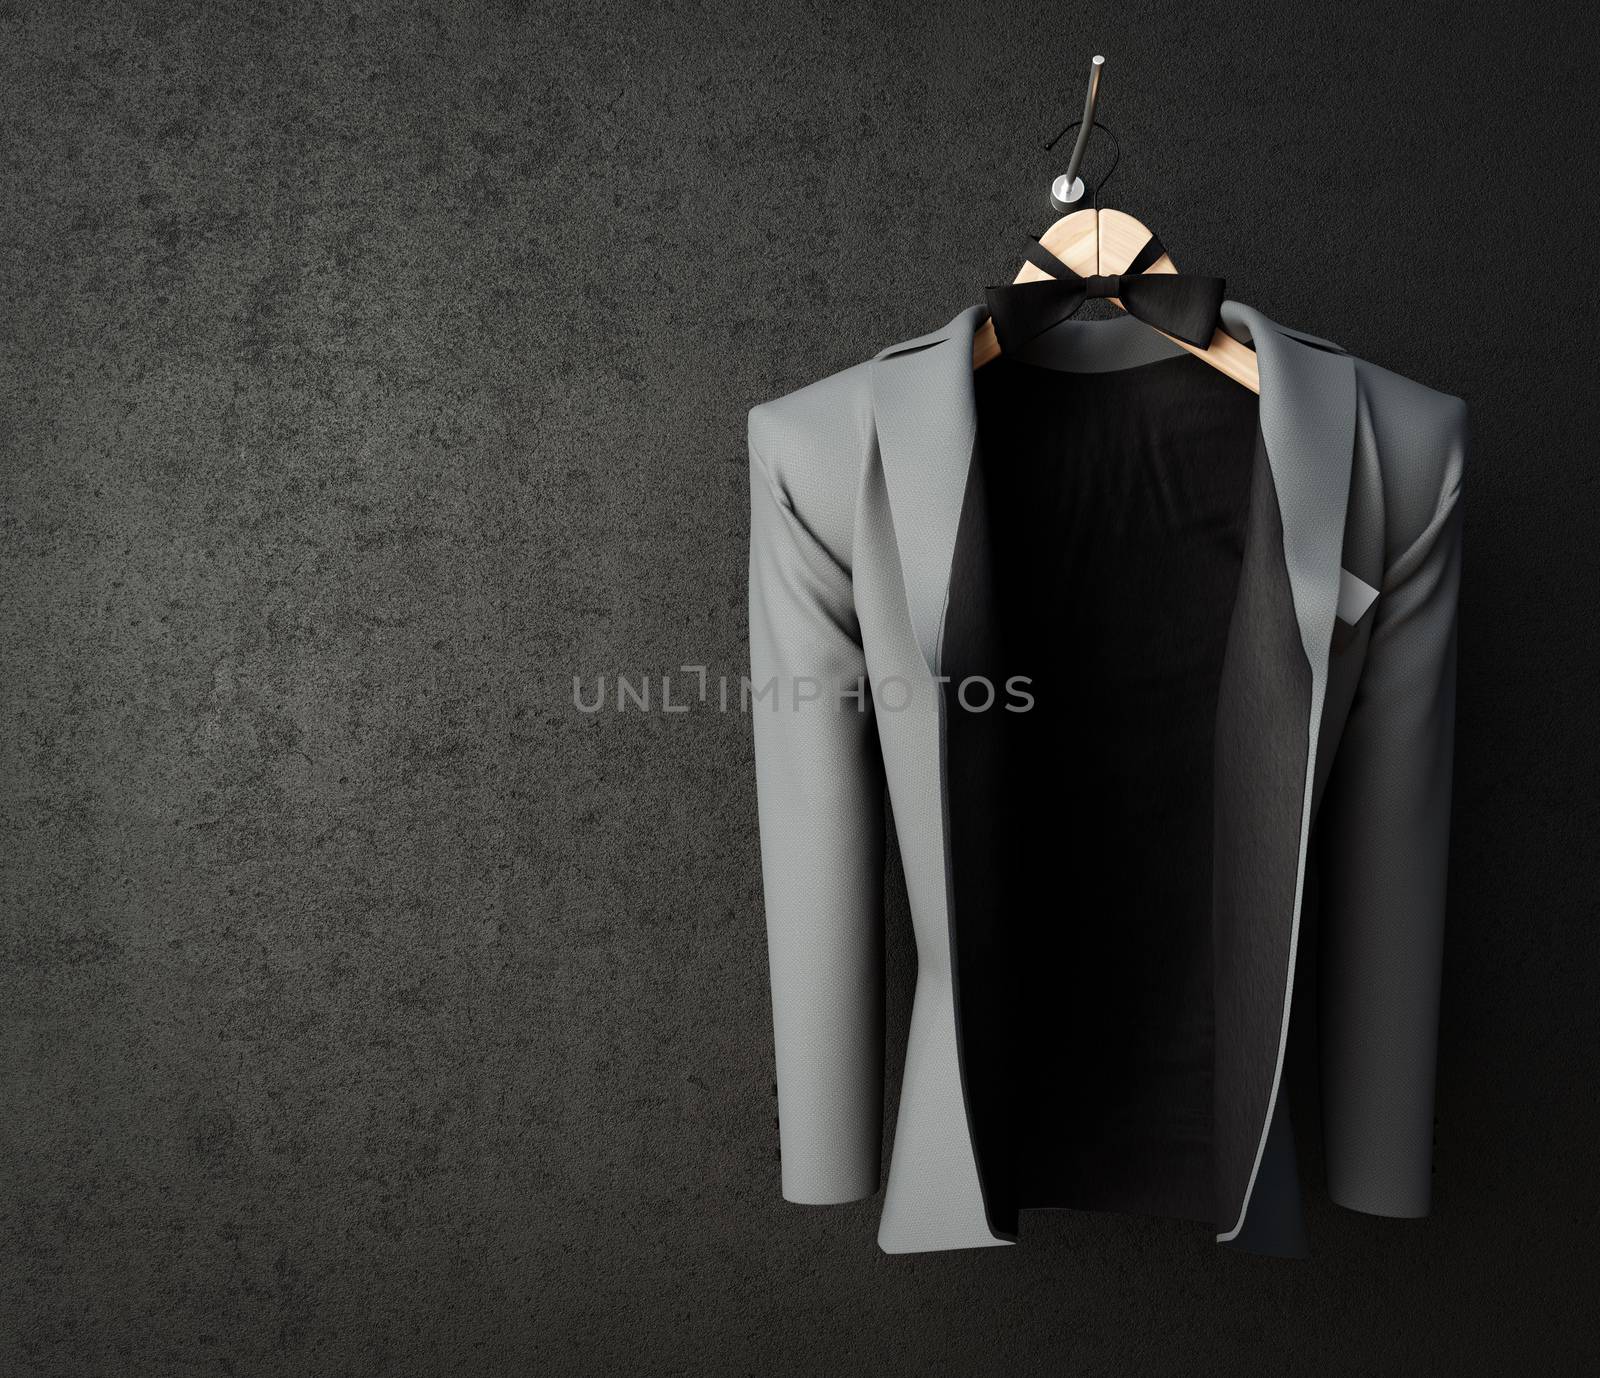 business jacket on textured wall concept photo background by denisgo